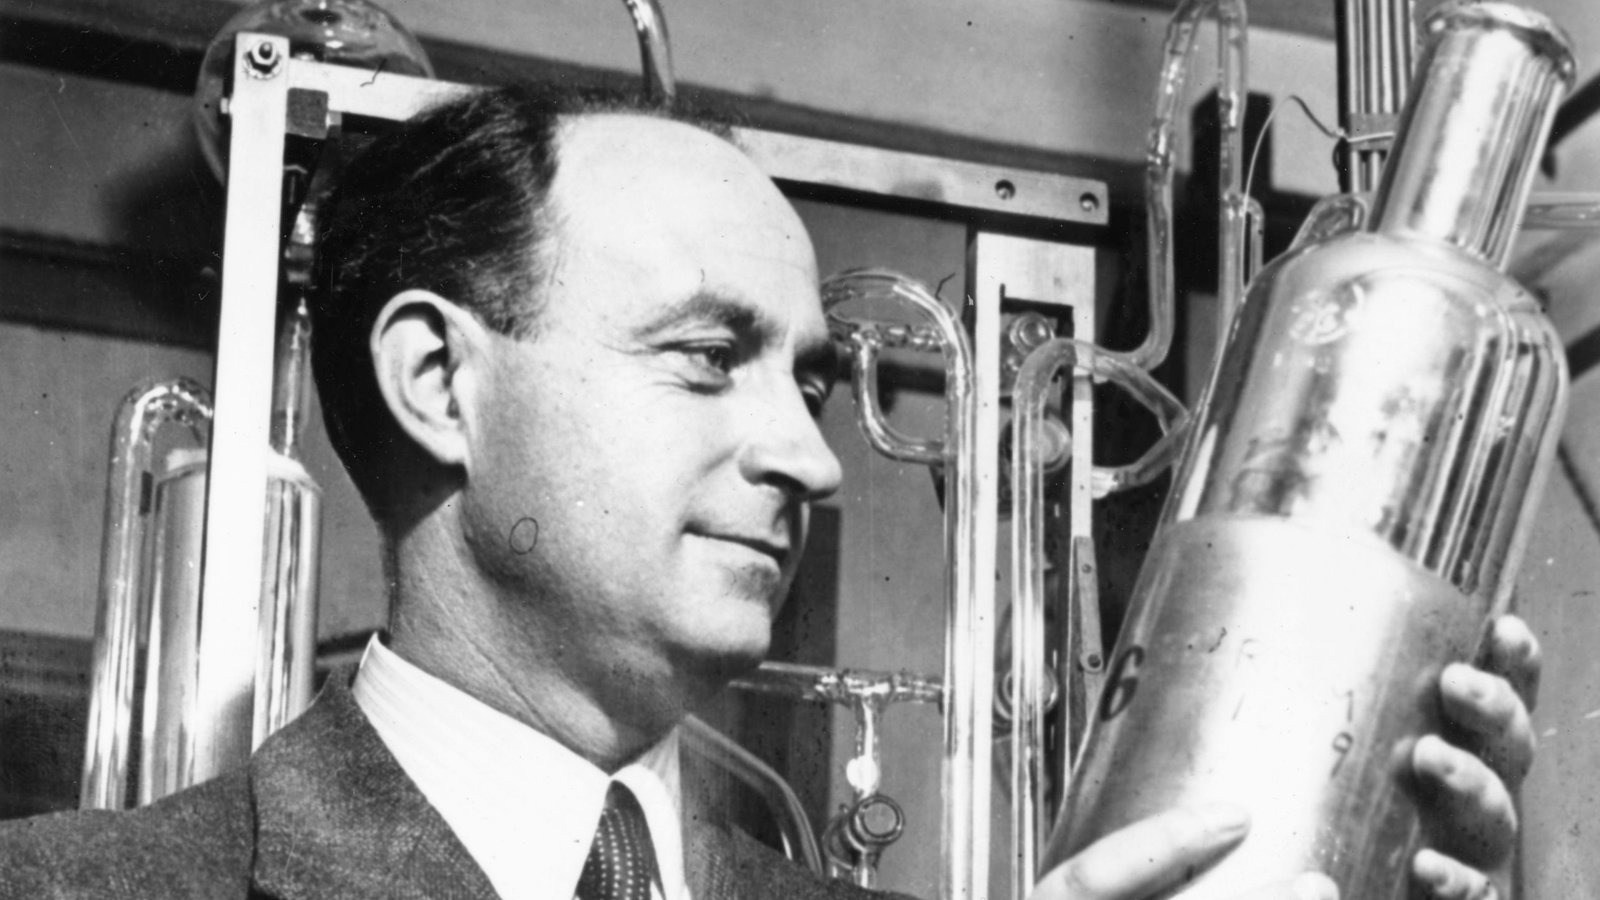 how did enrico fermi split the atom and how did fermi discover nuclear fission which produced energy